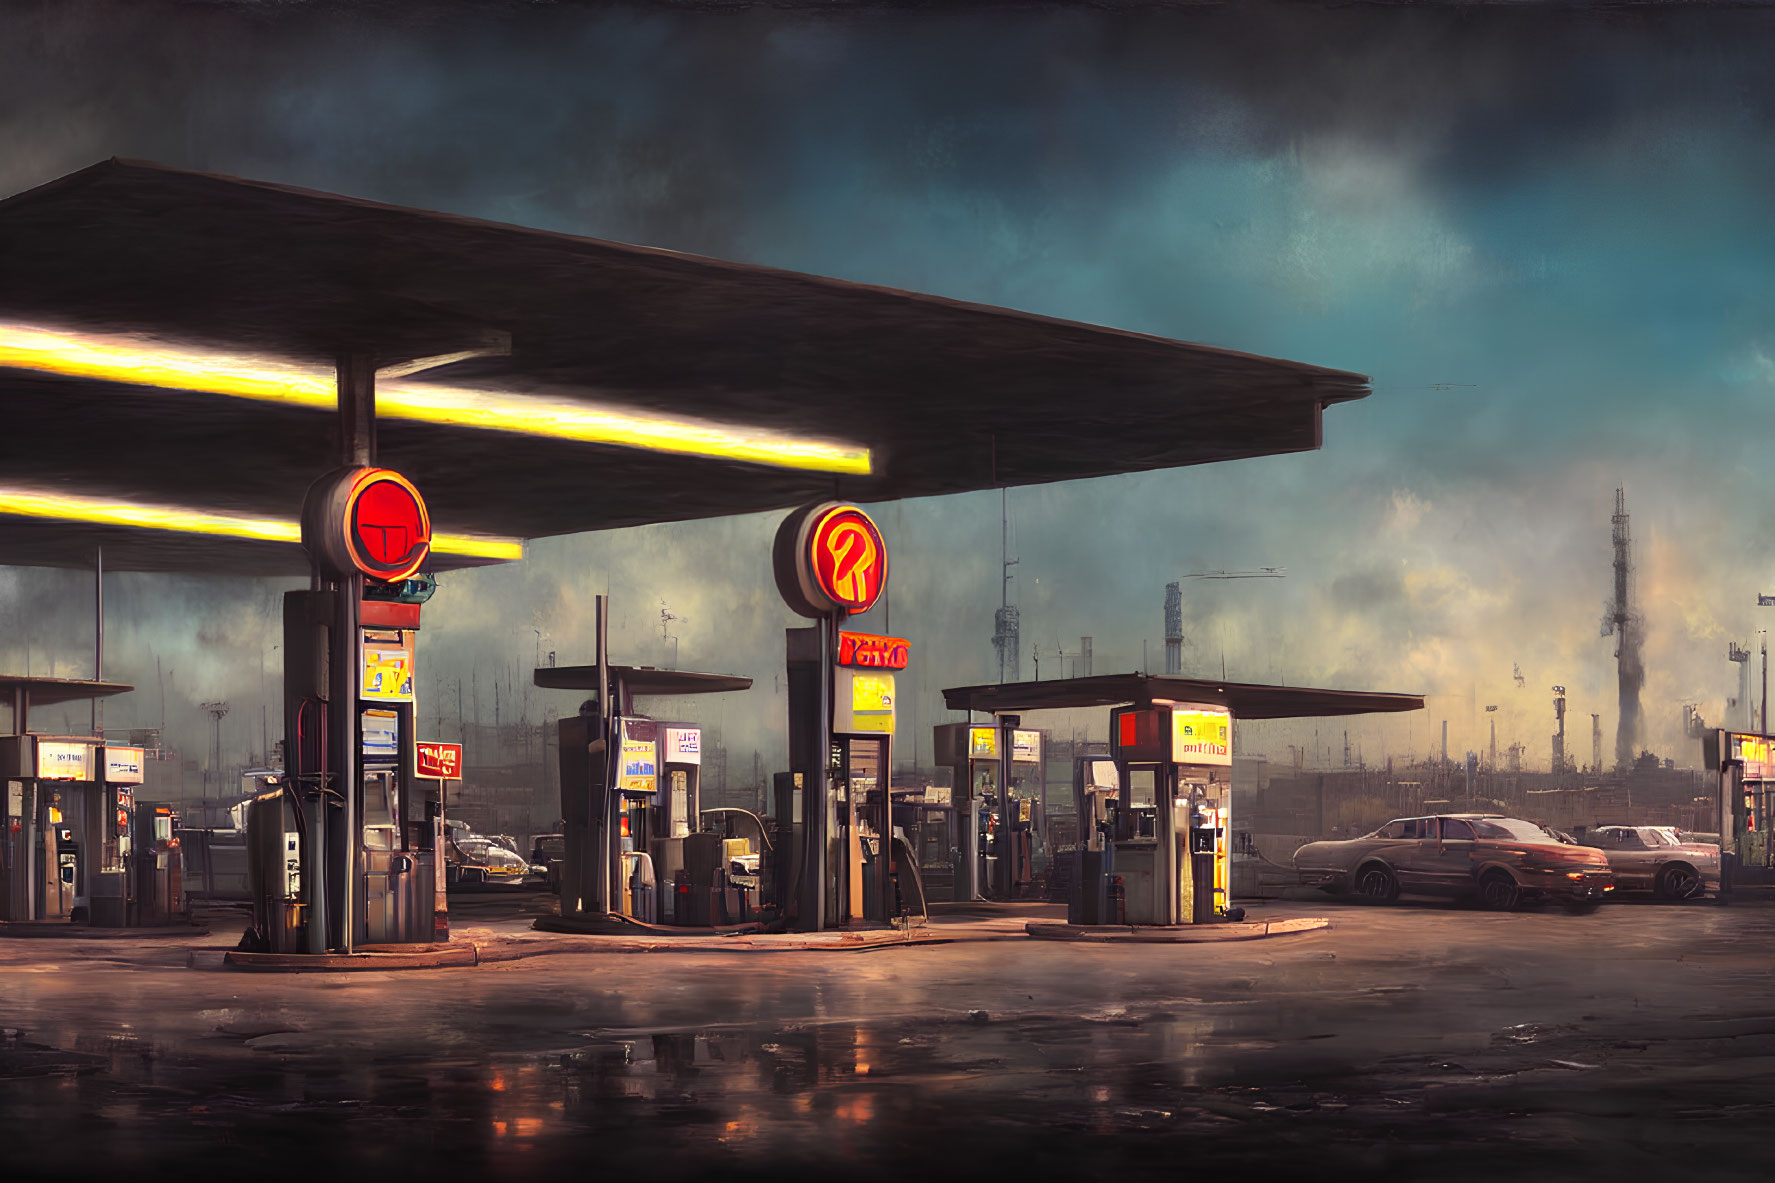 Dystopian gas station with neon signs and futuristic cityscape